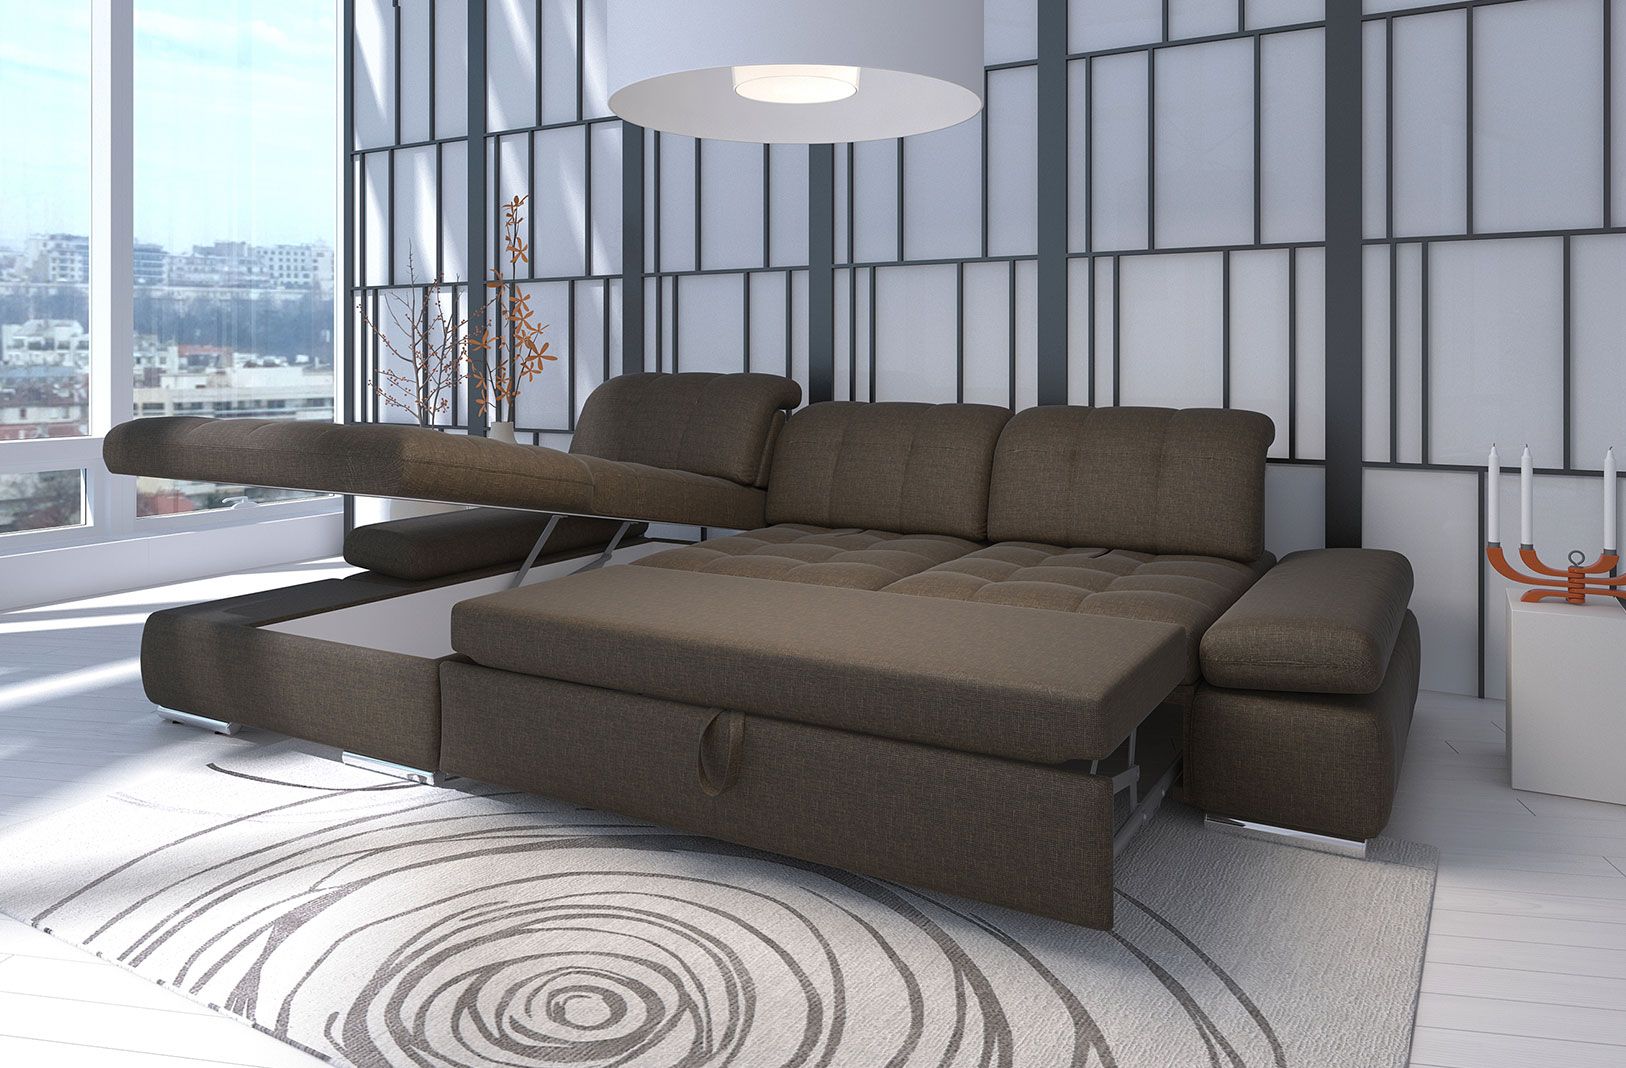 How to decorate your home using sectional
sleeper sofa